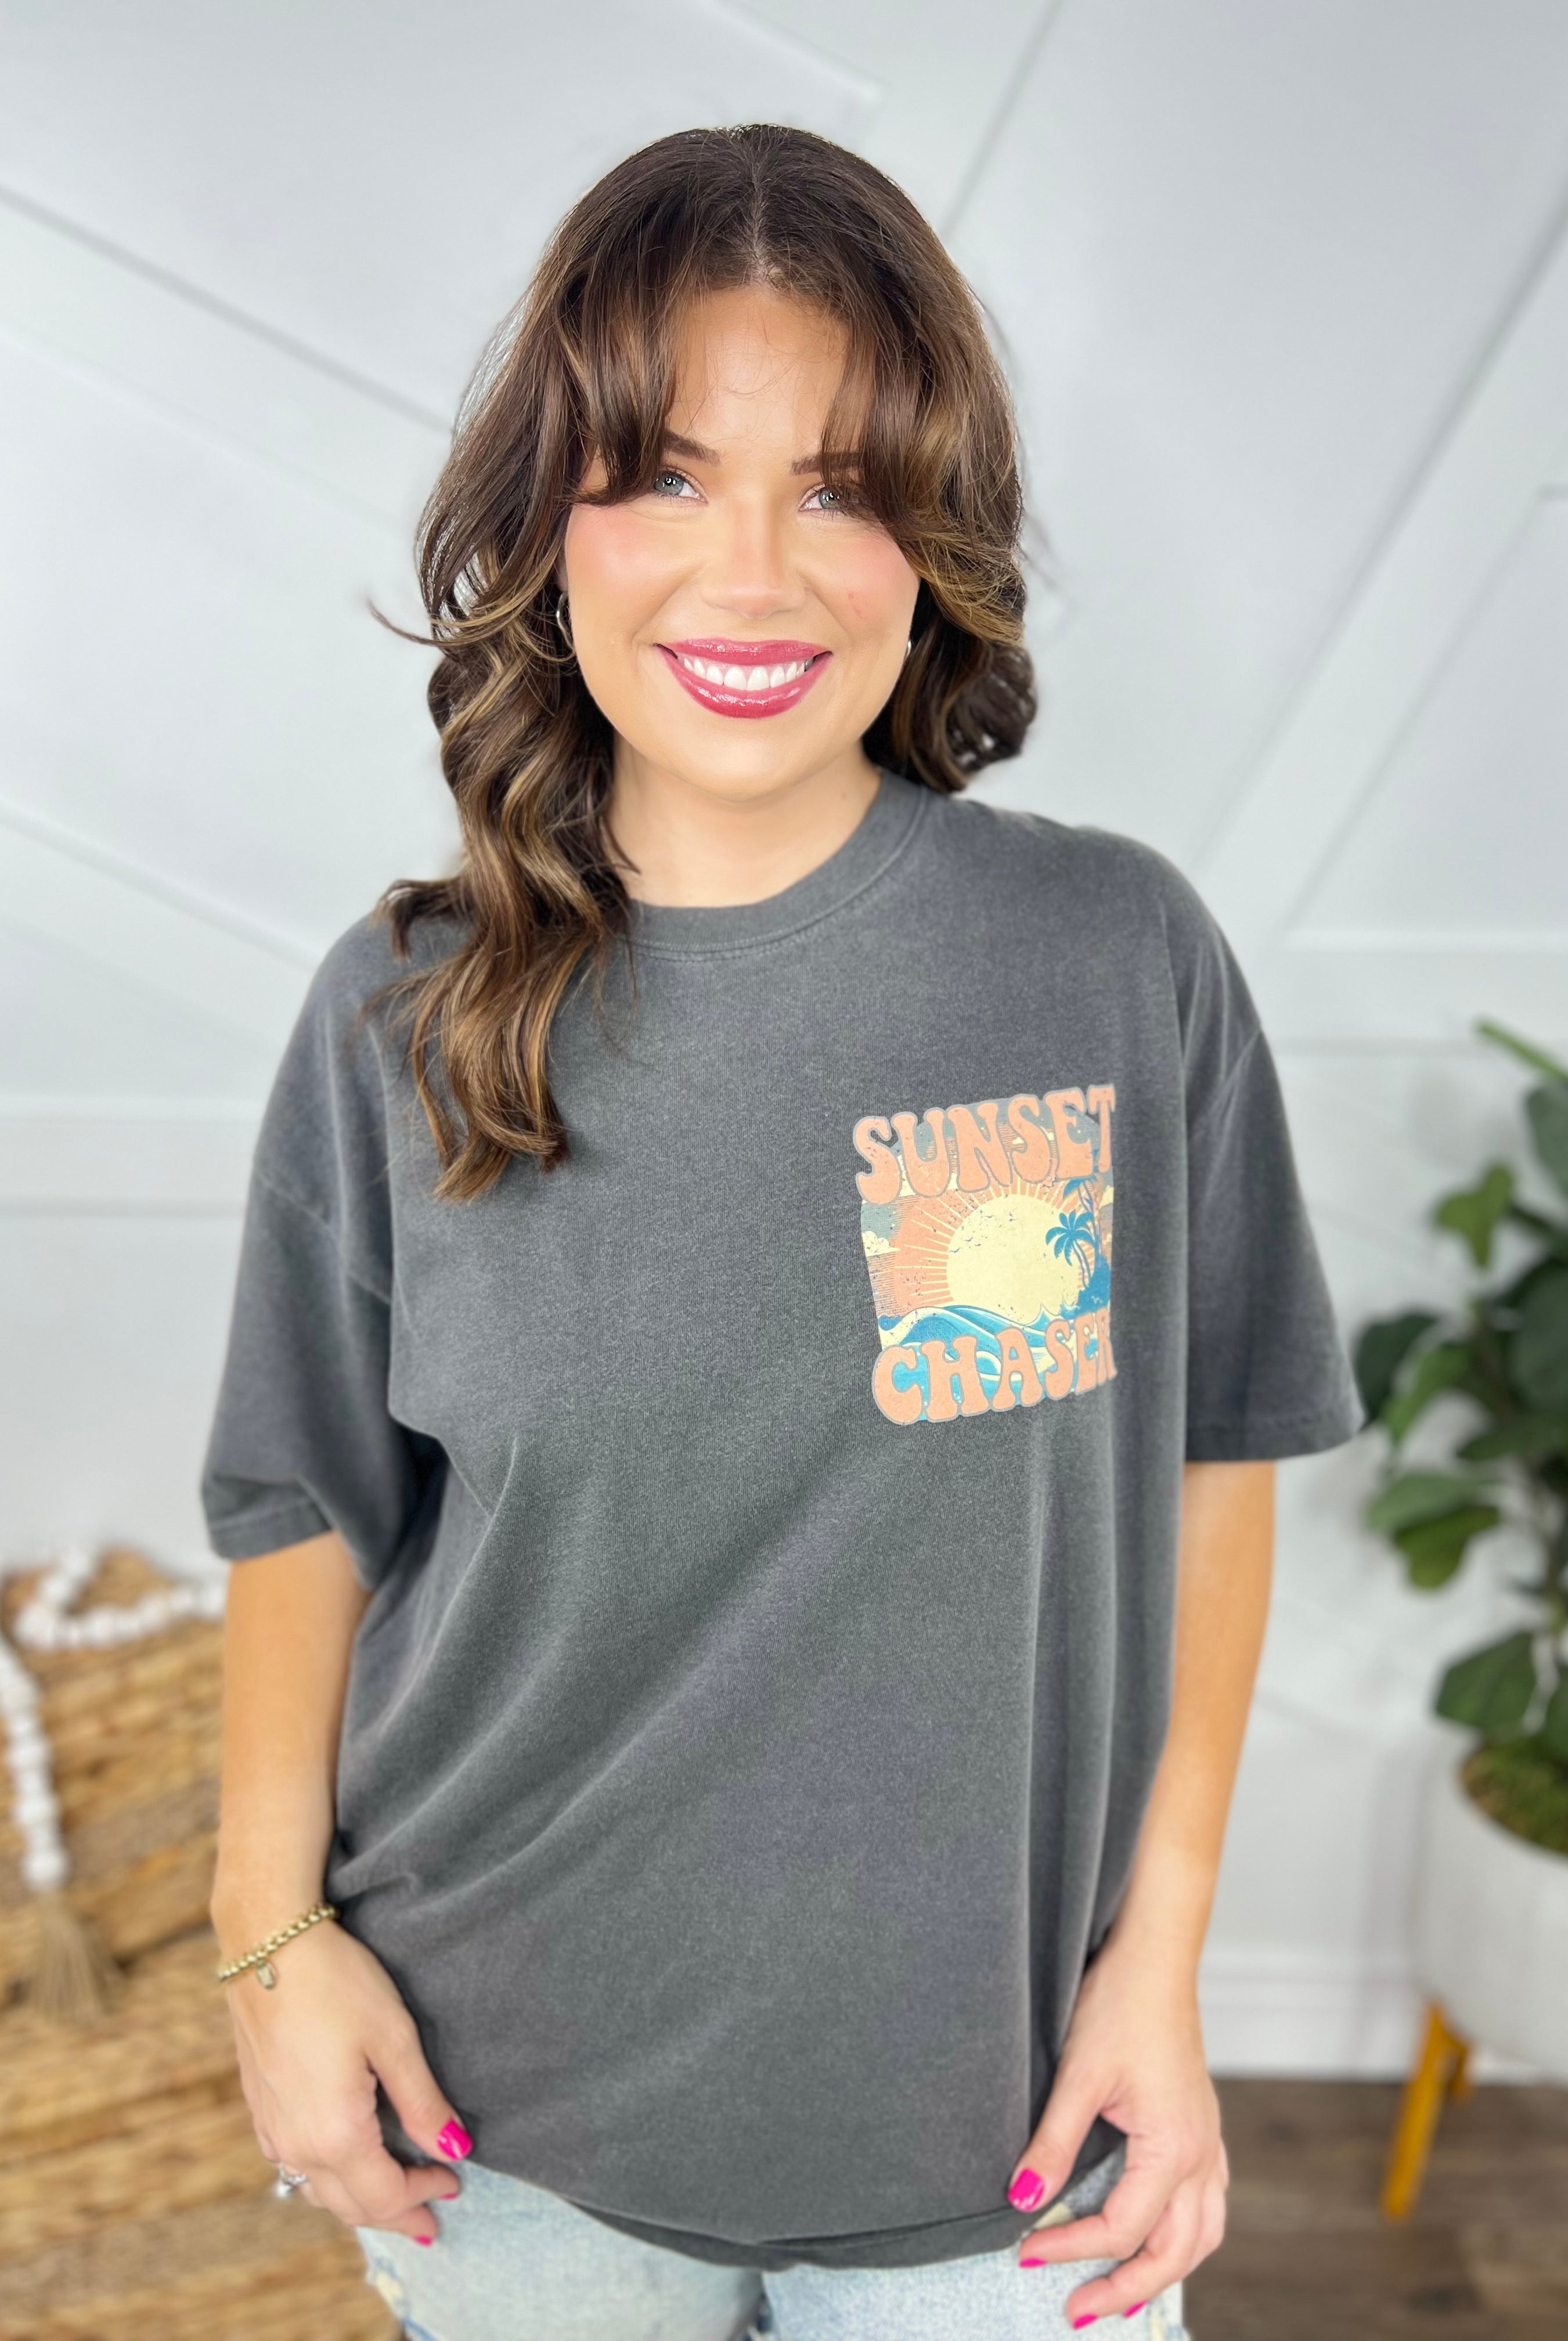 Busy Chasing Sunsets Graphic Tee-130 Graphic Tees-Heathered Boho-Heathered Boho Boutique, Women's Fashion and Accessories in Palmetto, FL